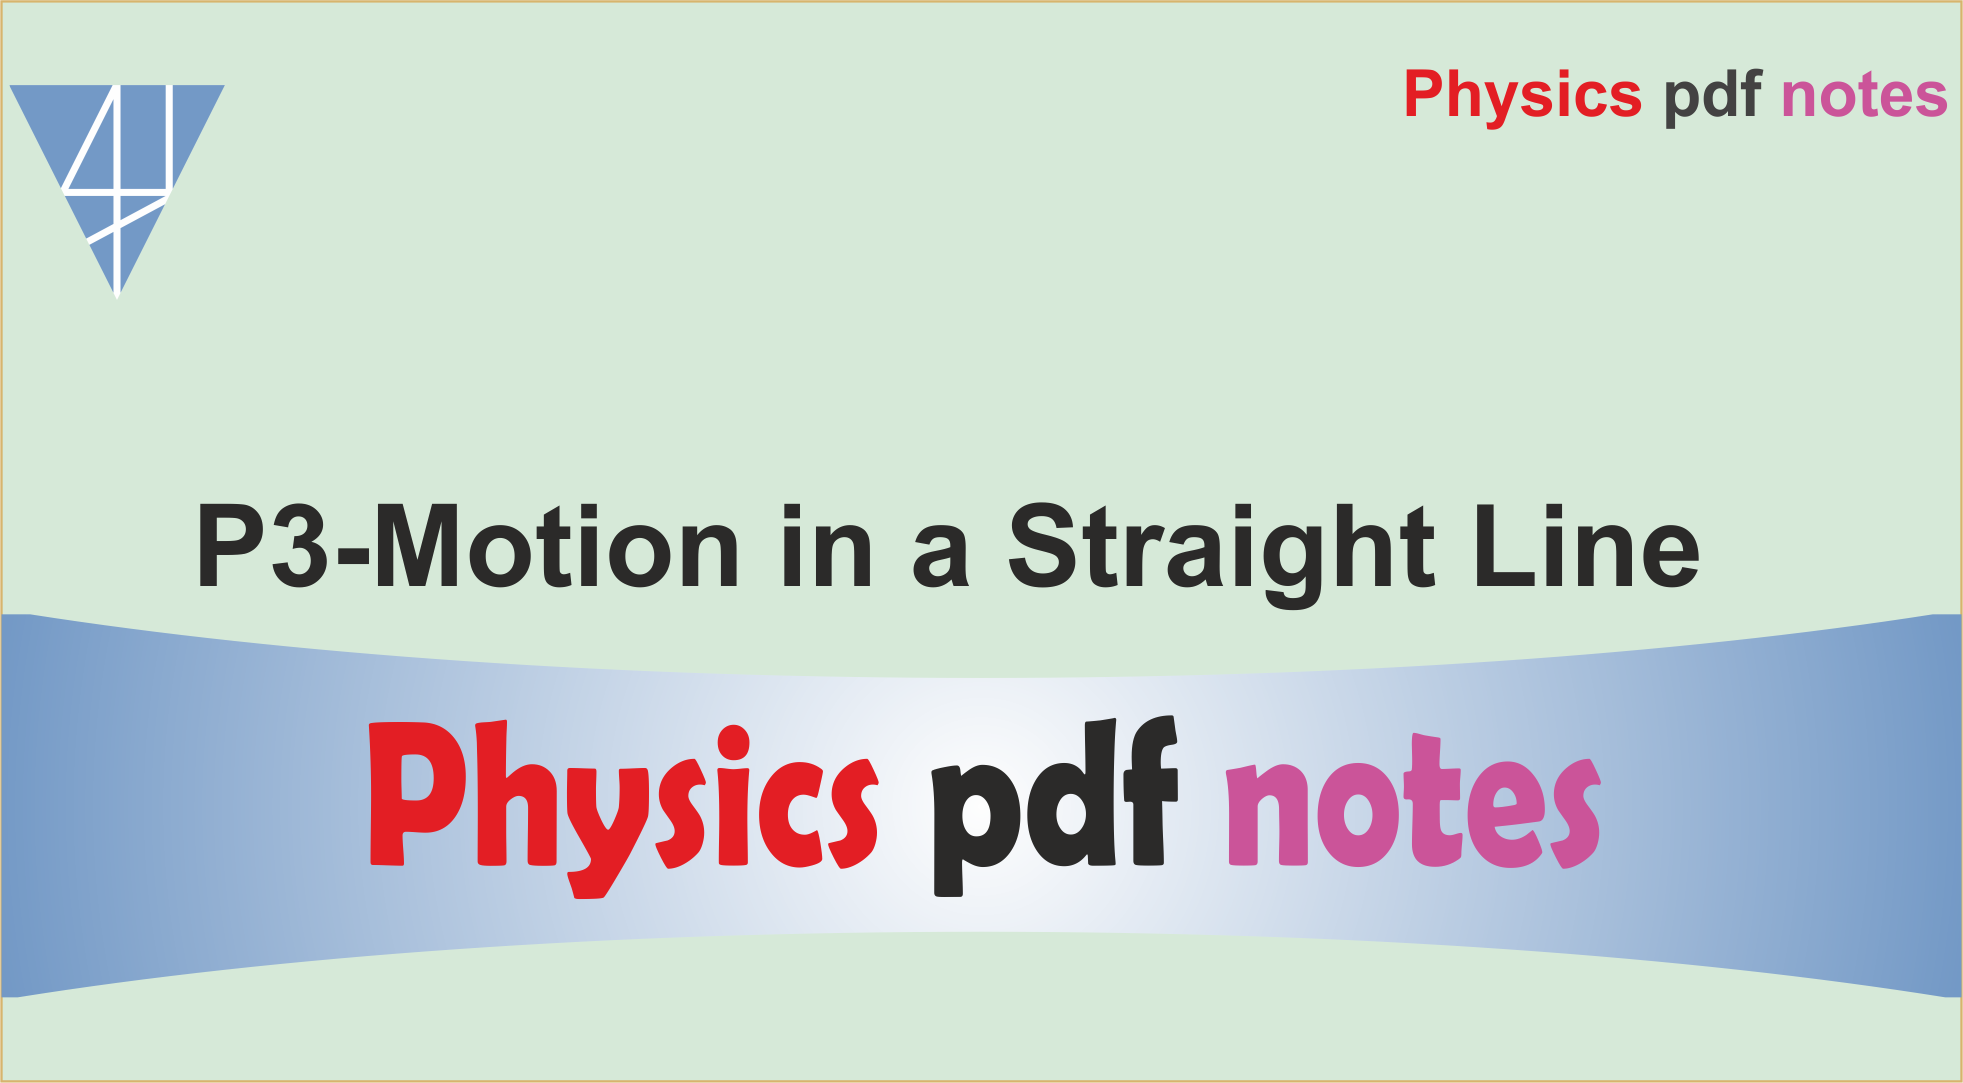 P3-Motion in a Straight Line